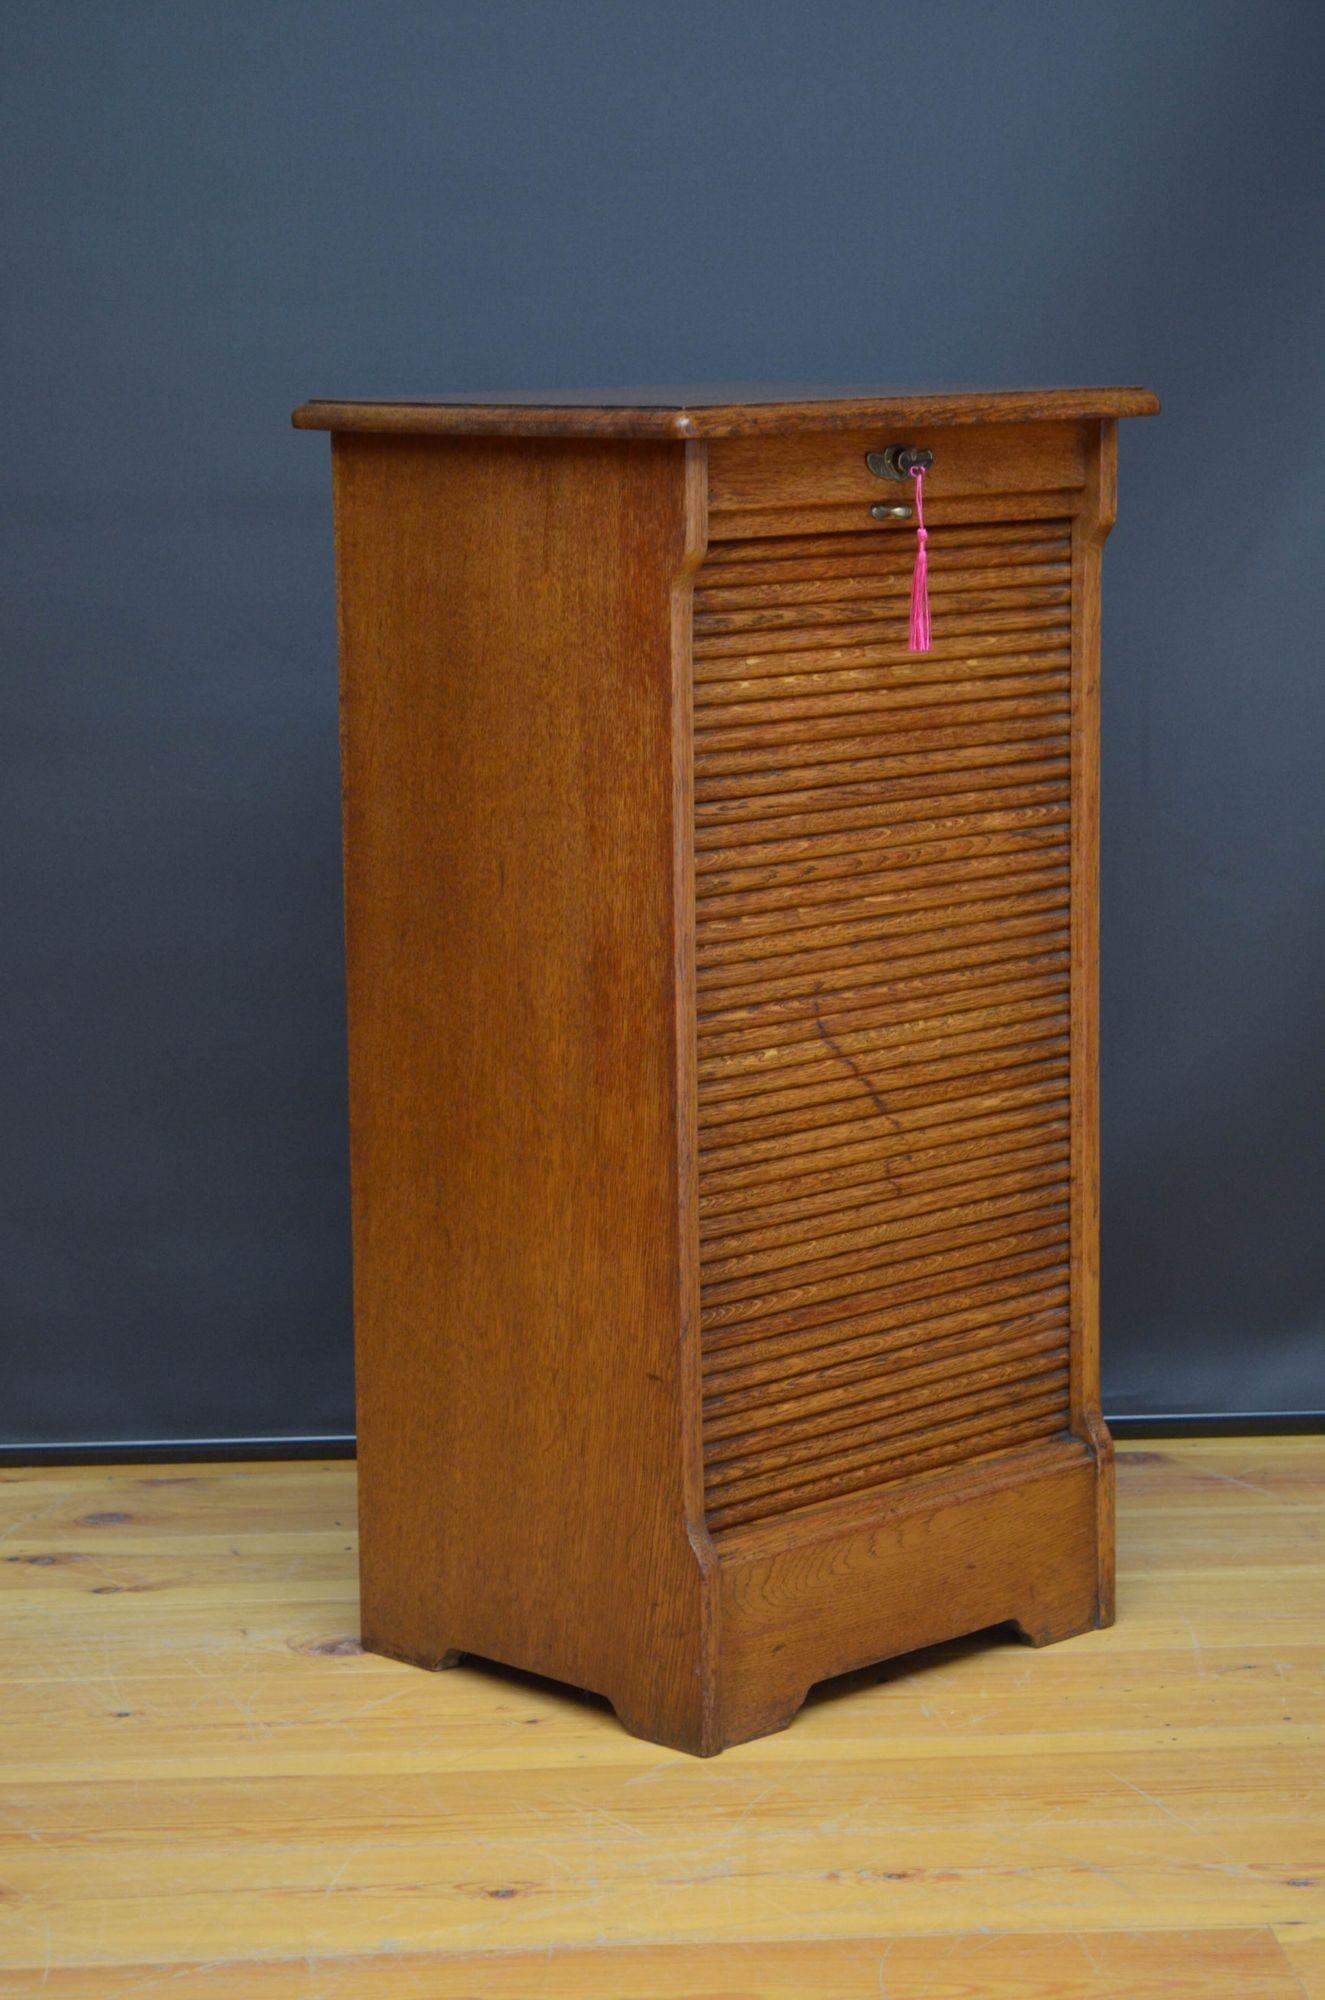 Sn5383 Turn of the century oak, tambour fronted filing cabinet of soft colour, having moulded top and tambour front enclosing 11 sliders, fitted with original working lock and key, standing on plinth base. This antique filing cabinet has been